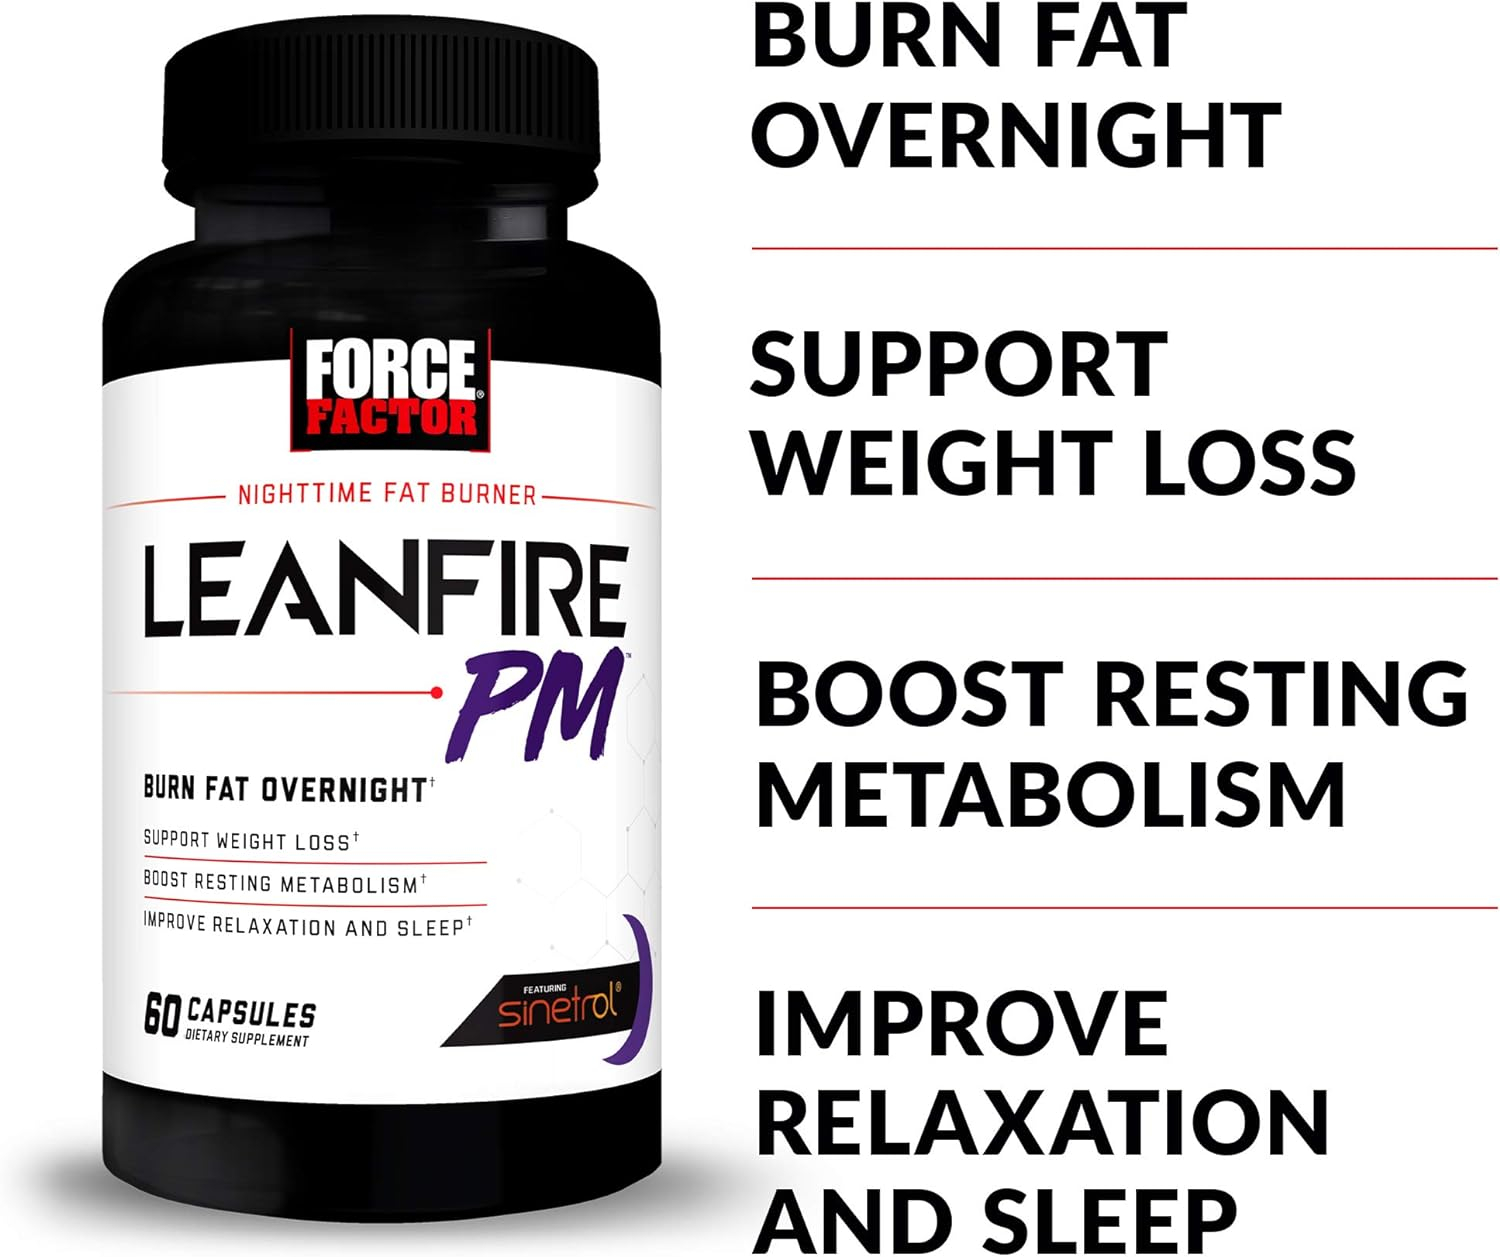 Force Factor LeanFire PM Weight Loss Pills for Women  Men, Fat Burner  Overnight Weight Loss Pills to Burn Fat, Boost Metabolism, Improve Sleep, Powerful Formula for Incredible Results, 60 Capsules